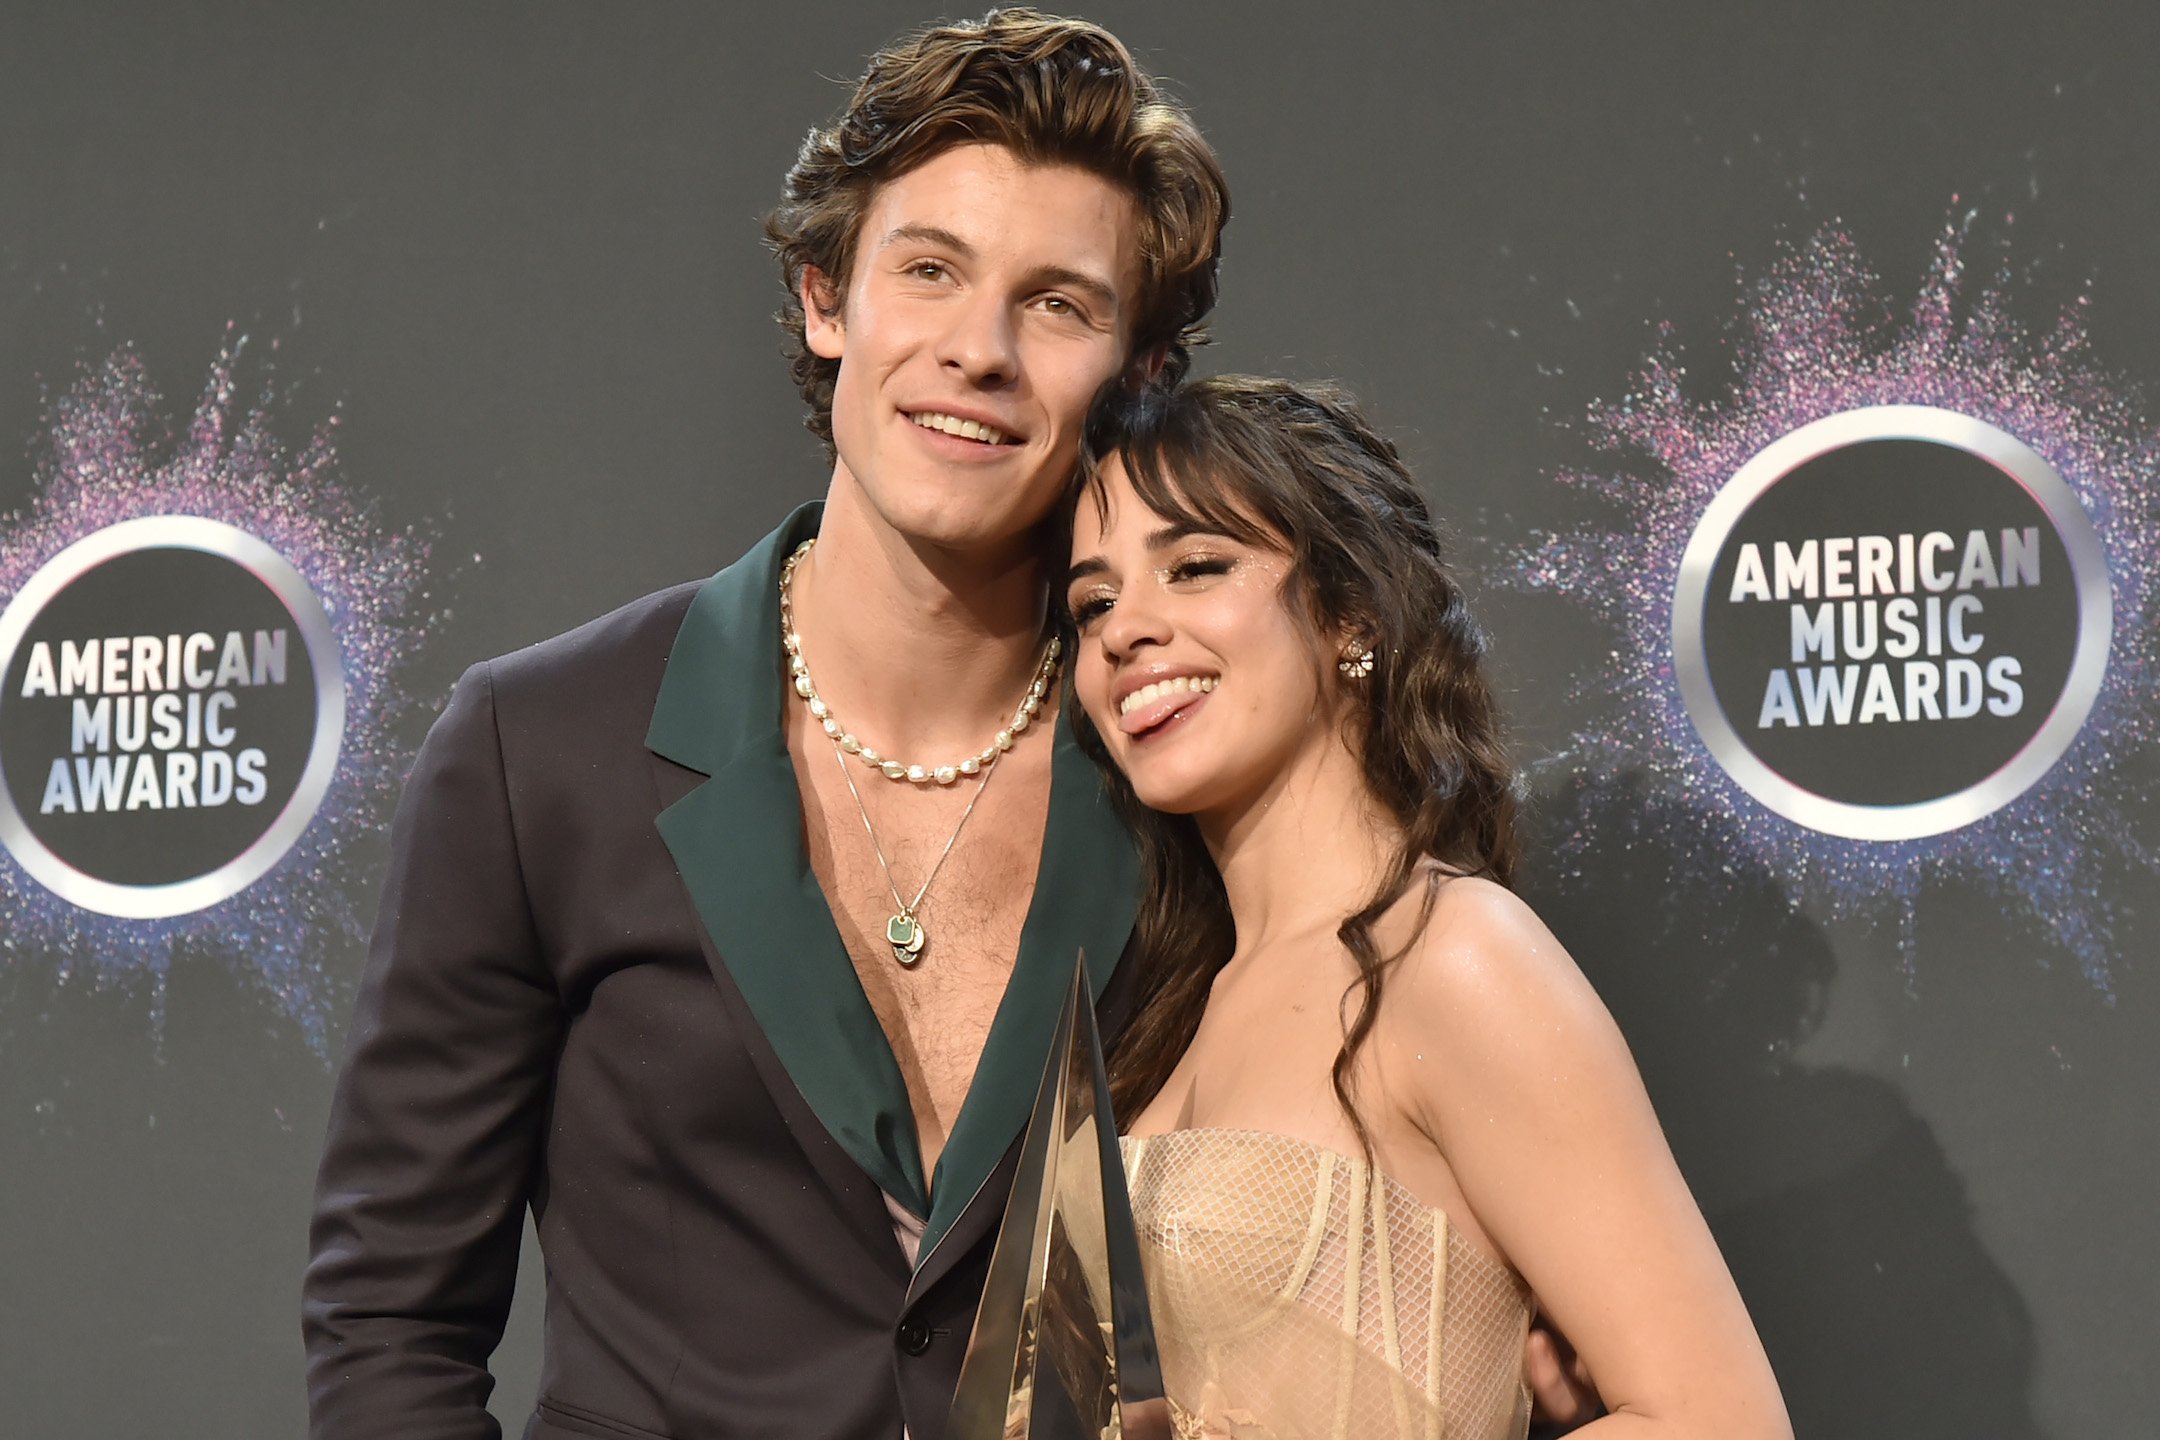 Shawn Mendes and Camila Cabello posing together in front of gray background